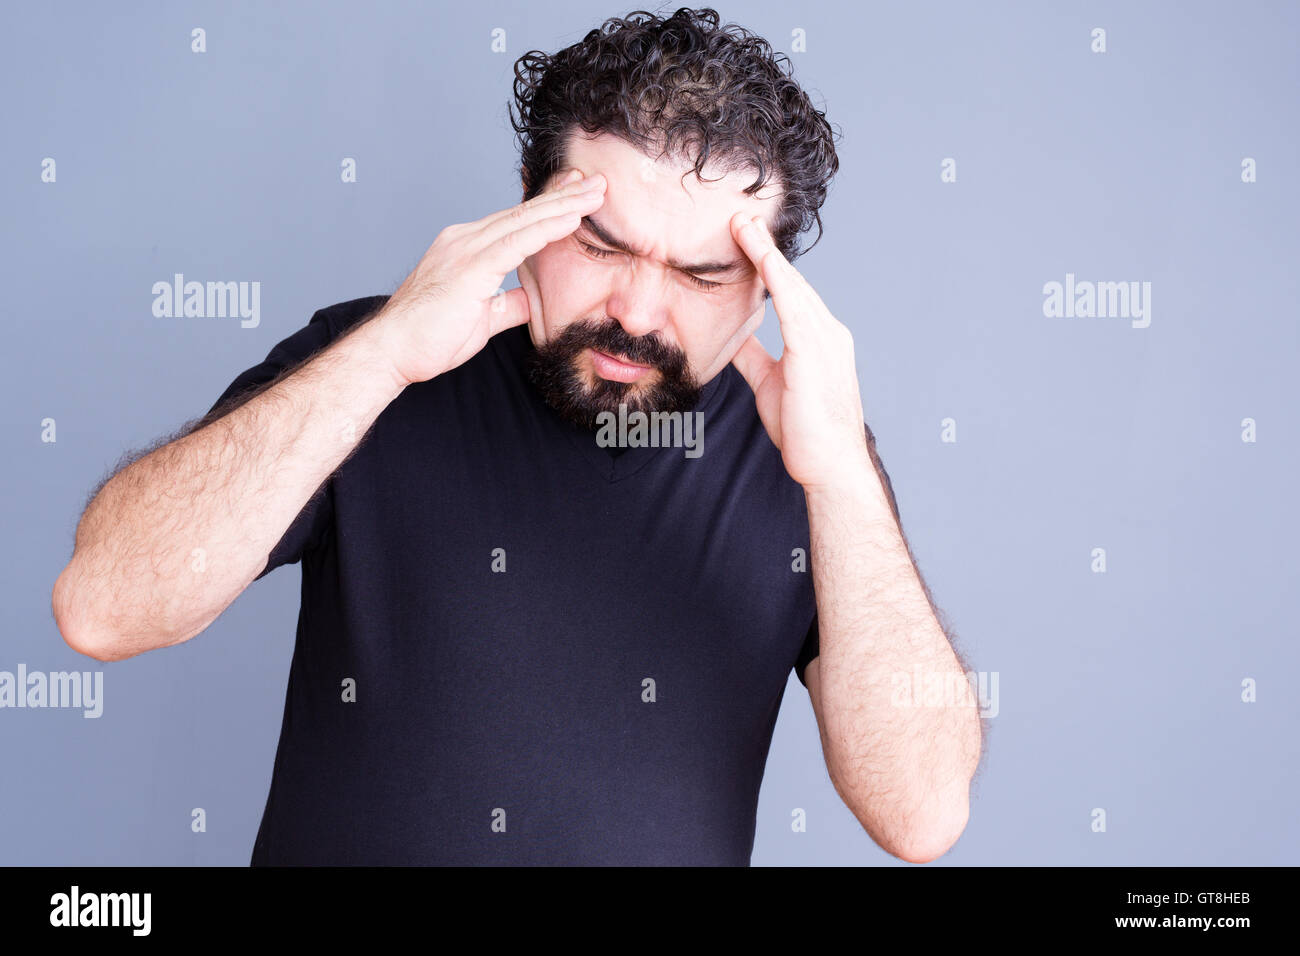 Single overworked man wearing beard rubbing his forehead in pain as if suffering from headache or stress over gray background Stock Photo